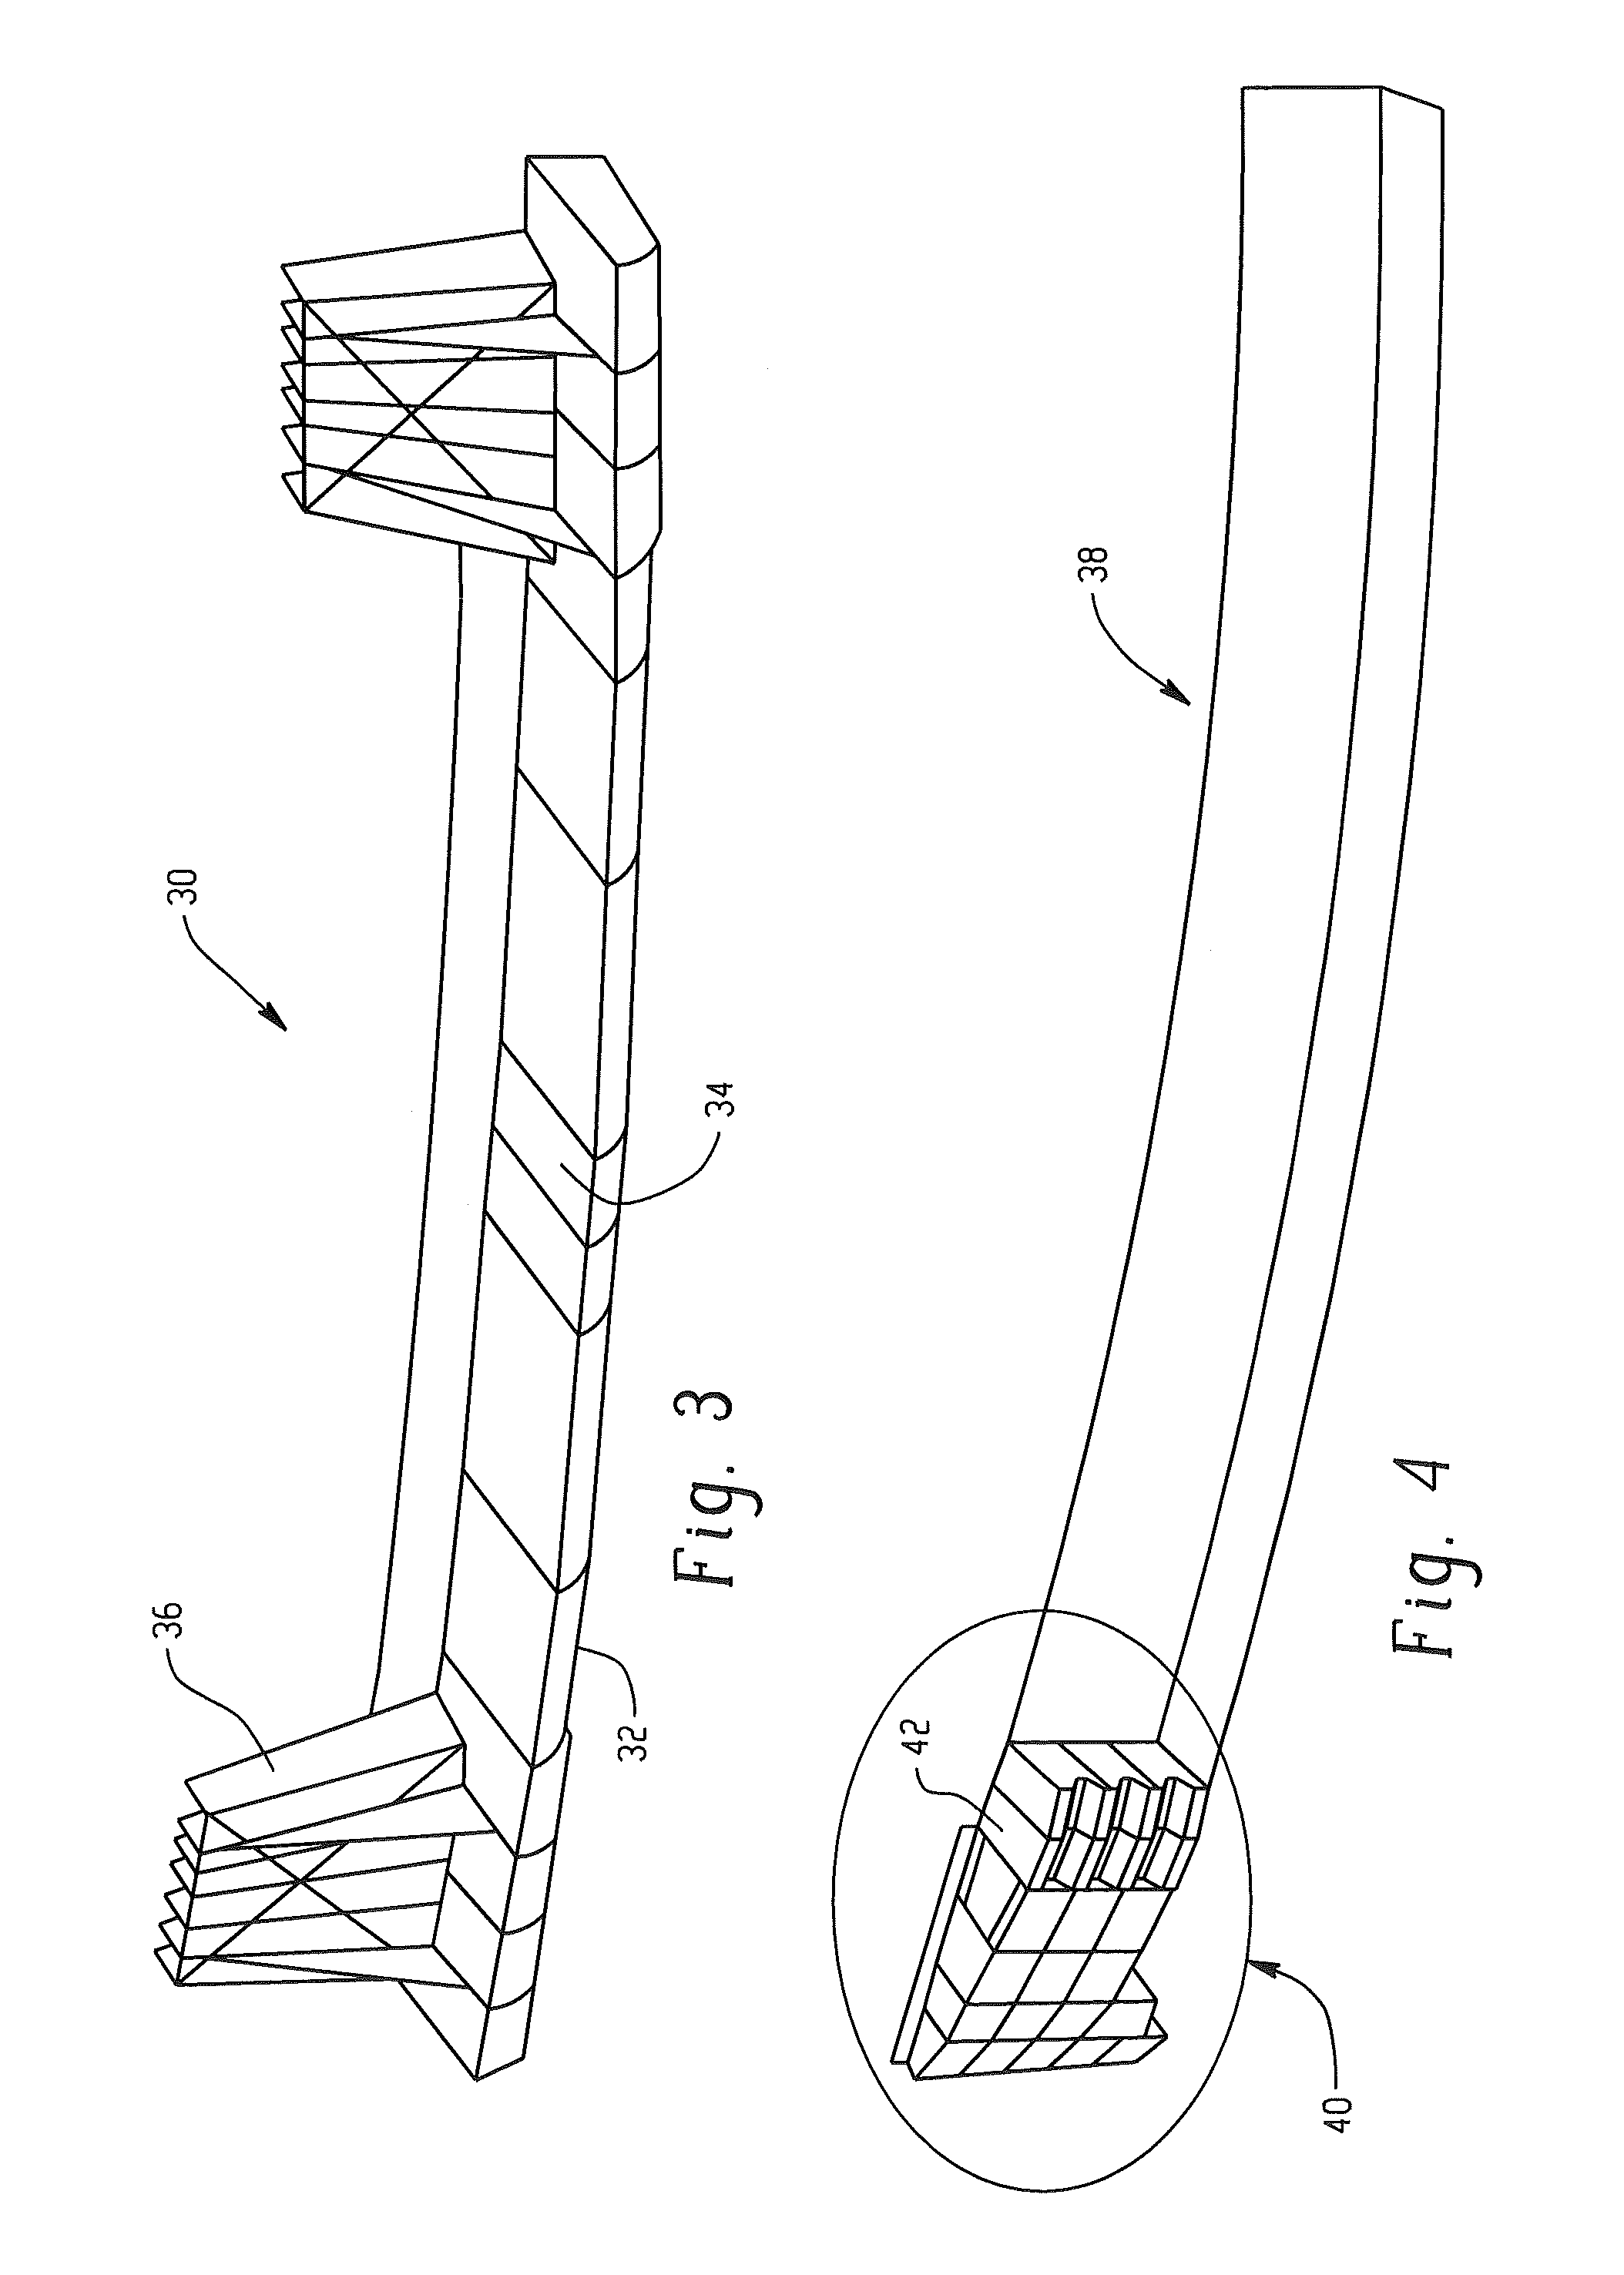 Reinforced plastic energy absorber system and methods of making the same